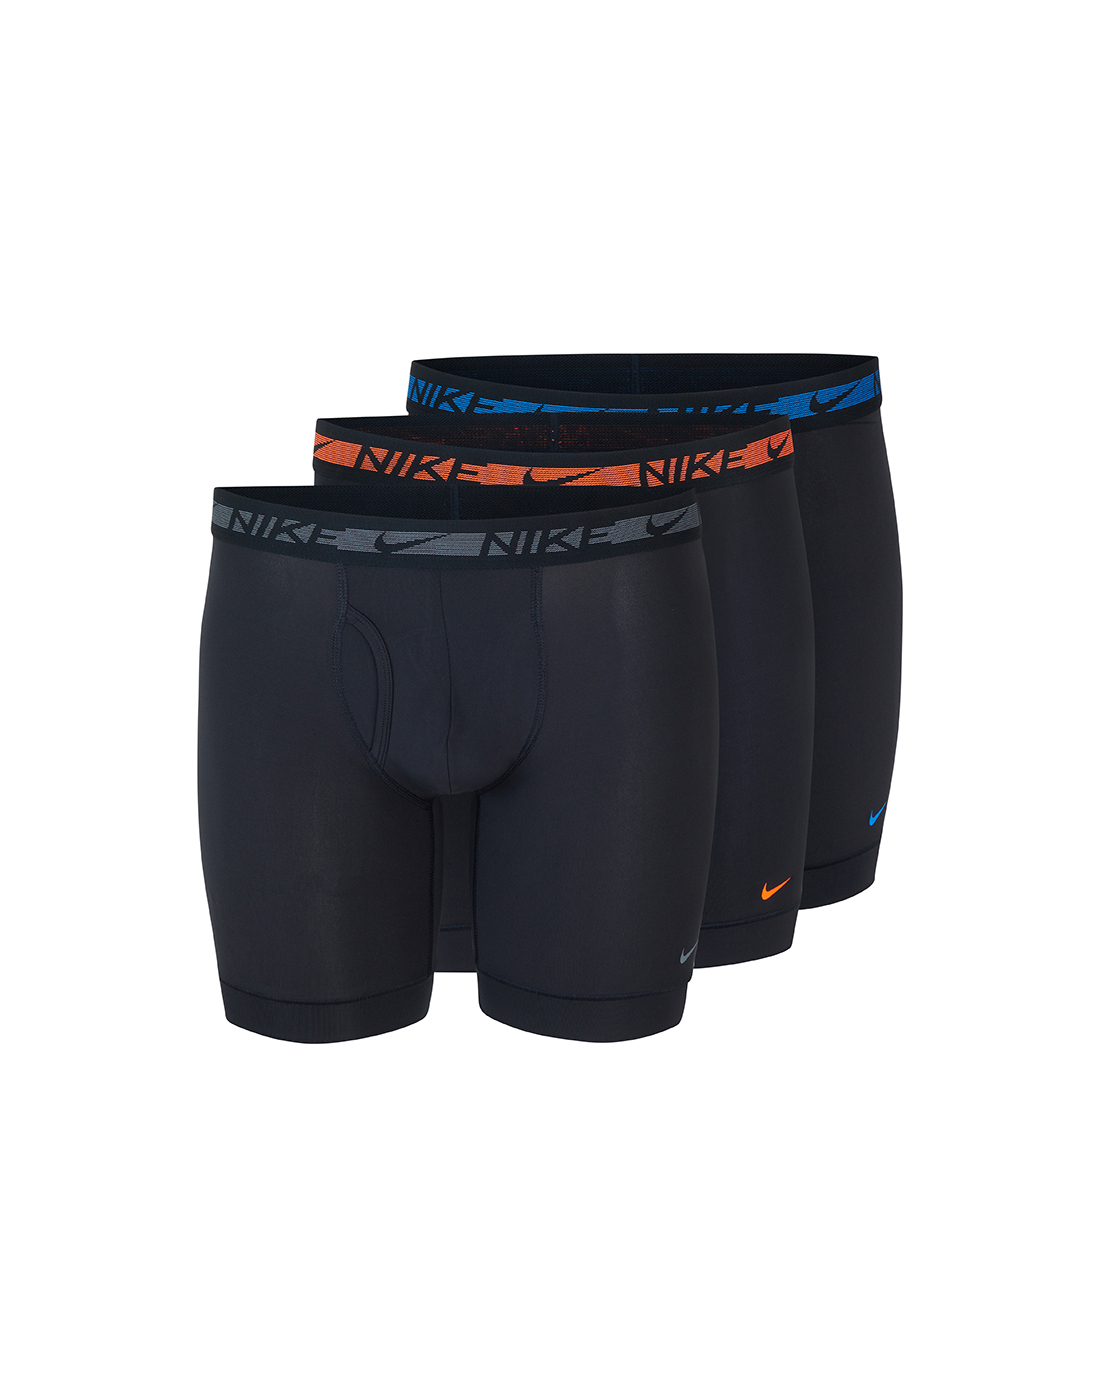 Nike MICRO FLEX 3 PACK BOXER BRIEF - Black | Life Style Sports IE